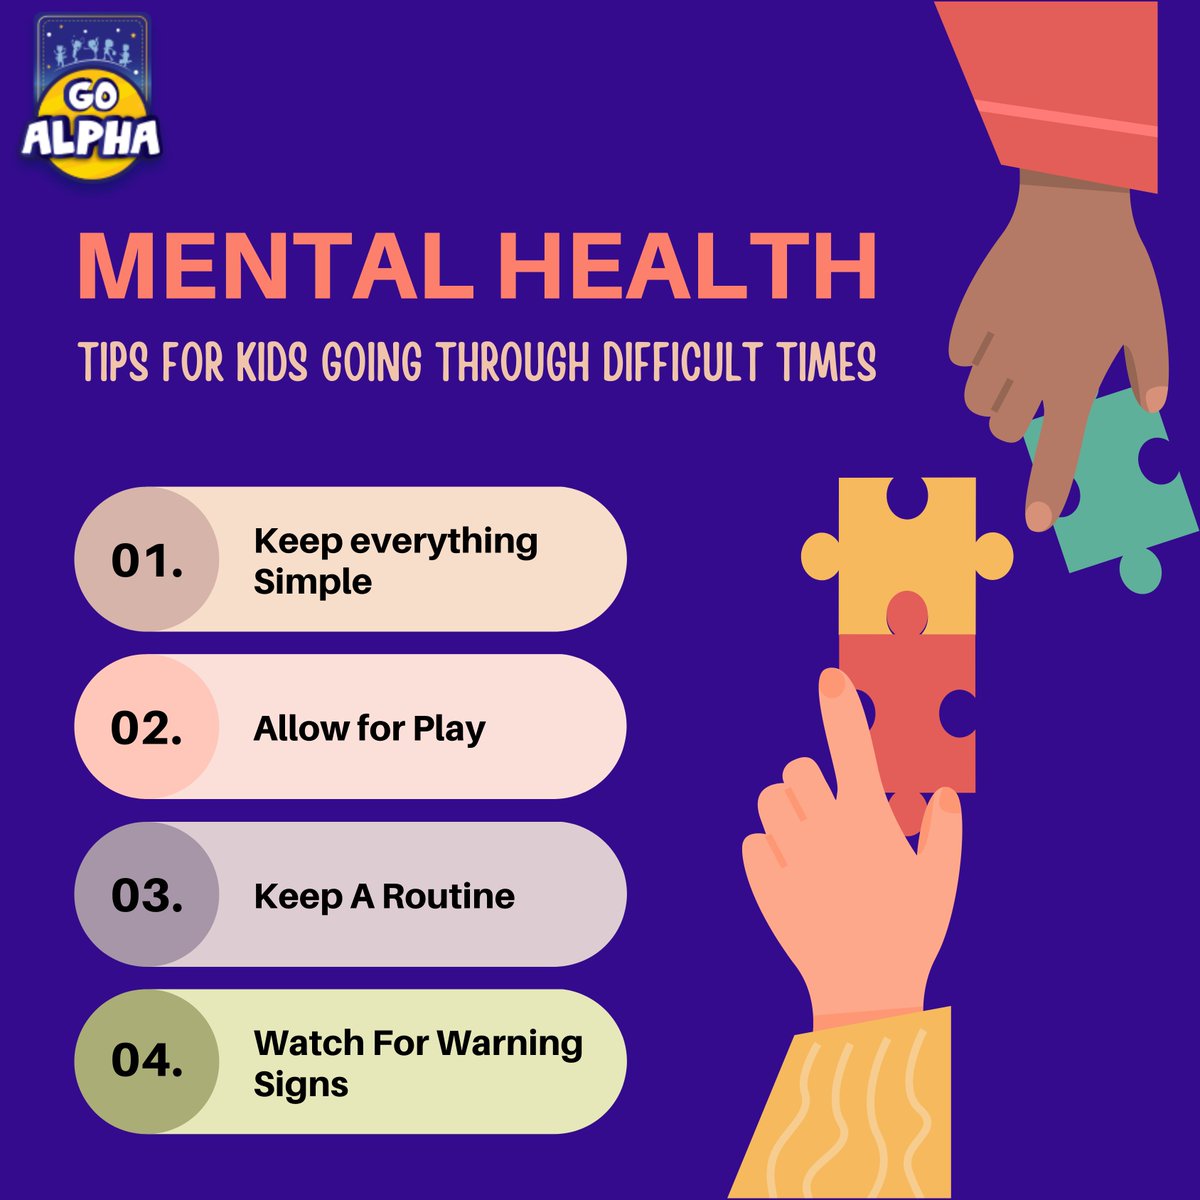 Here are some incredible Mental Health tips for treating your kids in stressful times.

#sportsforkids #toddlertraining #learningwithfun #preschool #kidsnursery #kindergarten #education #earlychildhoodeducation #childcare #earlylearning #toddler #everychildmatters